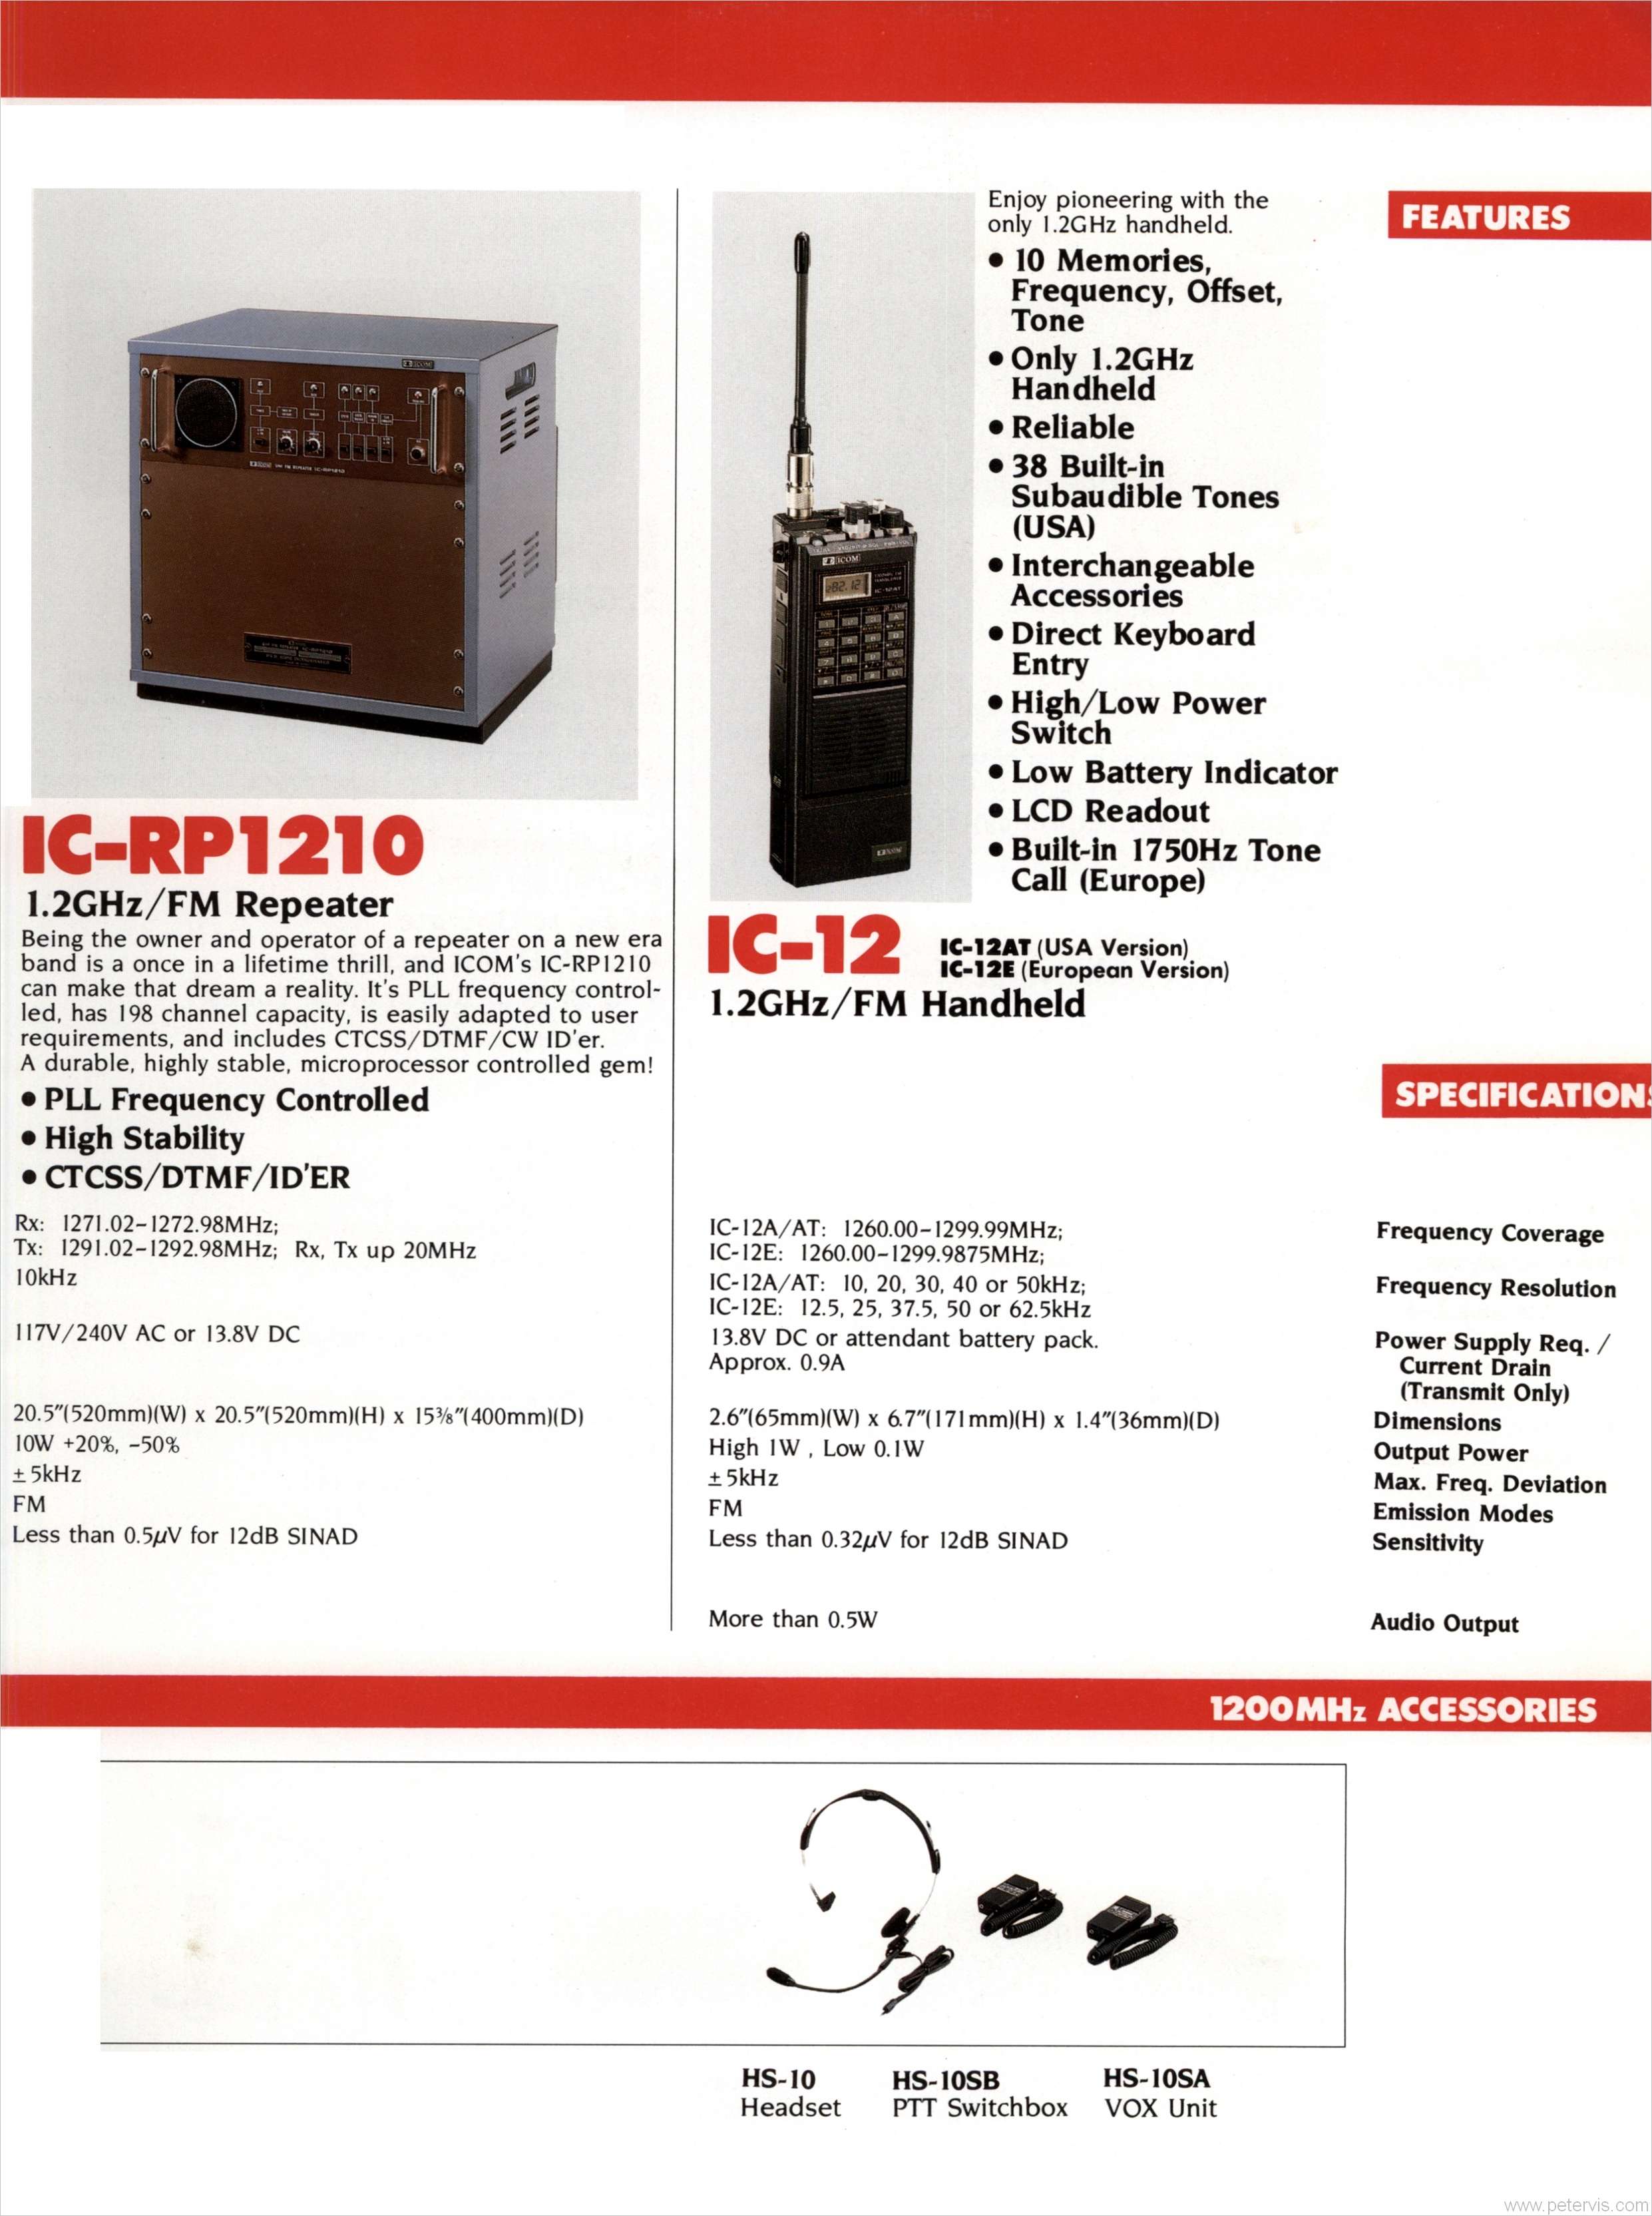 IC-RP1210 and IC-12